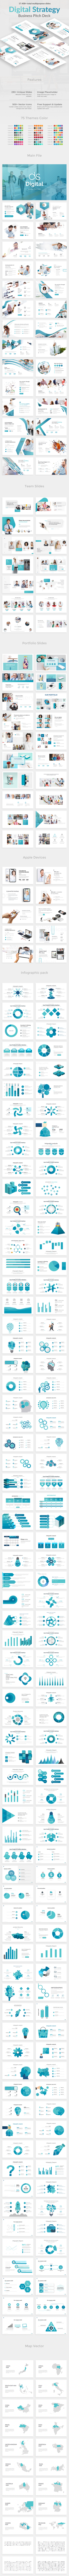 Digital Strategy Pitch Deck Powerpoint Template